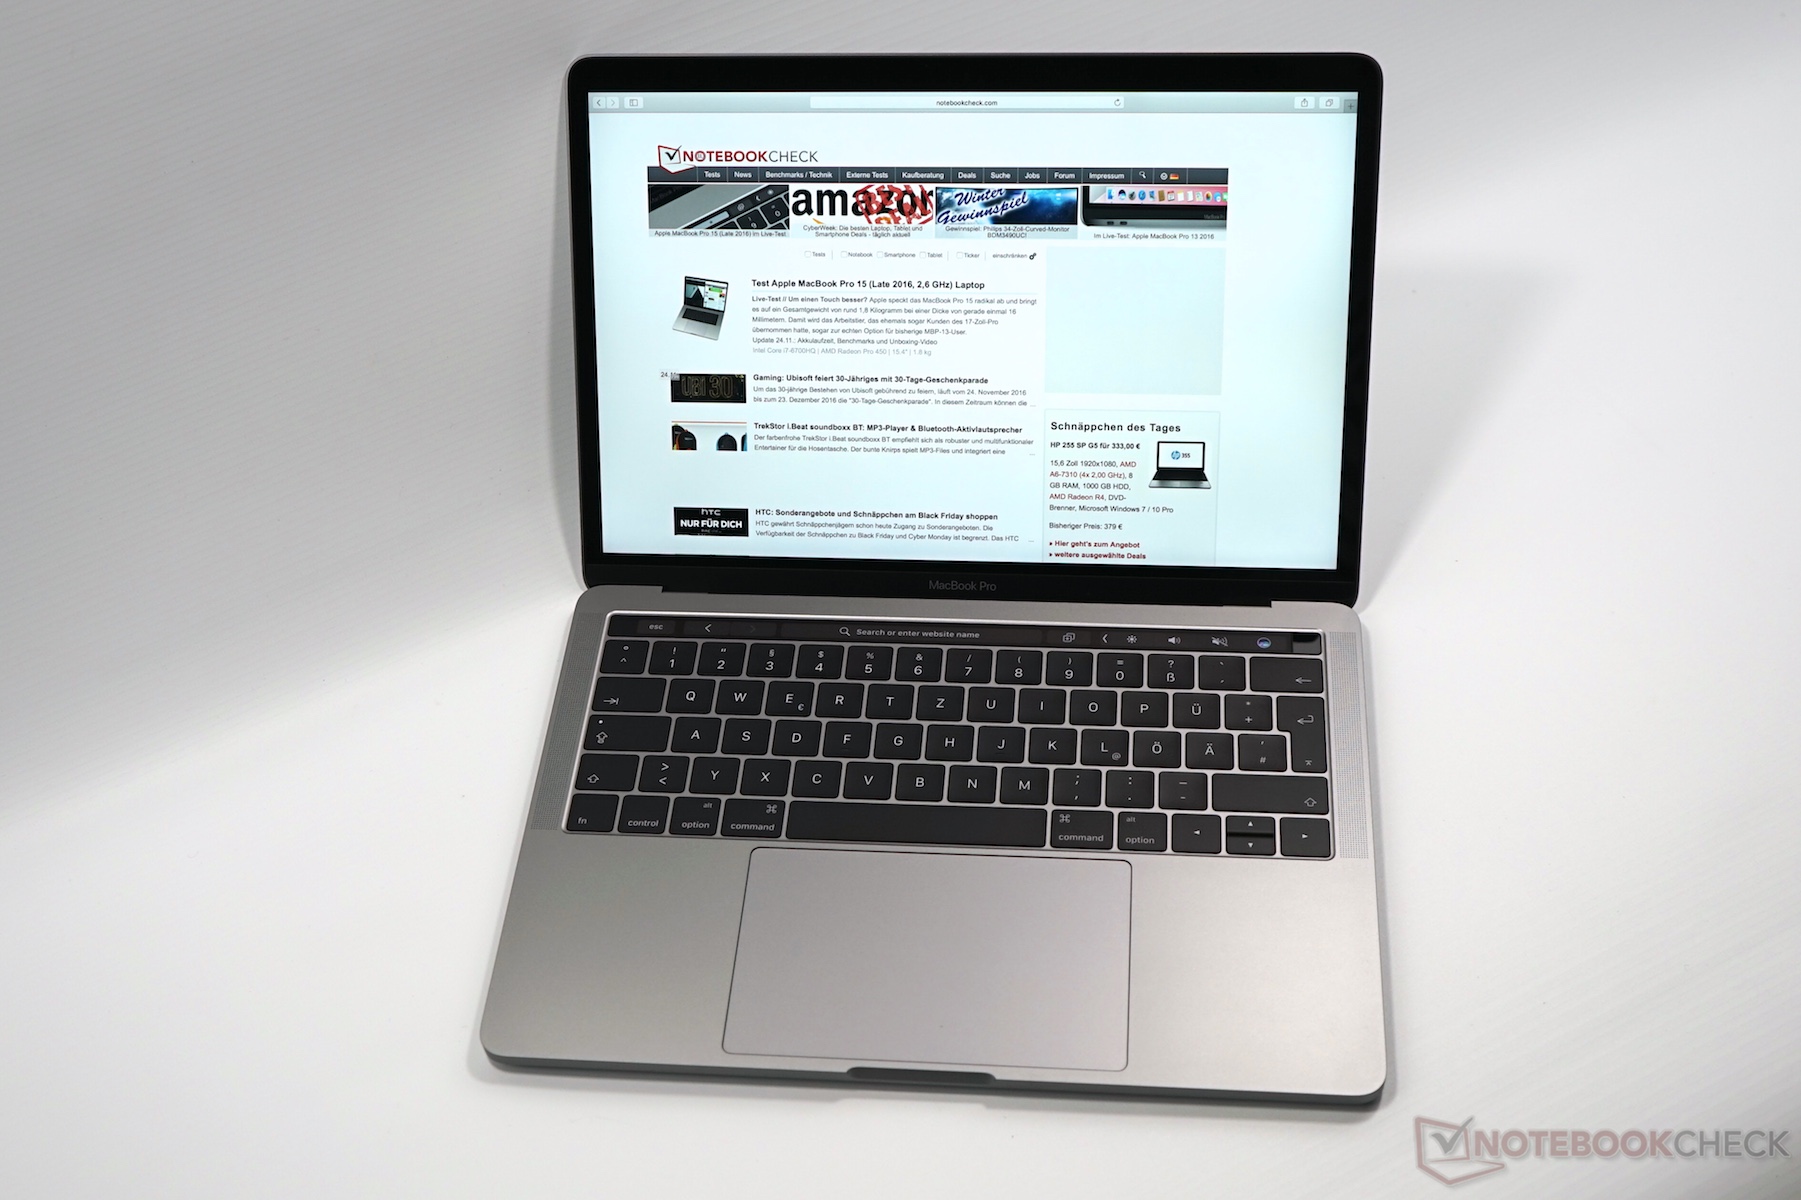 macbook pro 2018 13-inch review